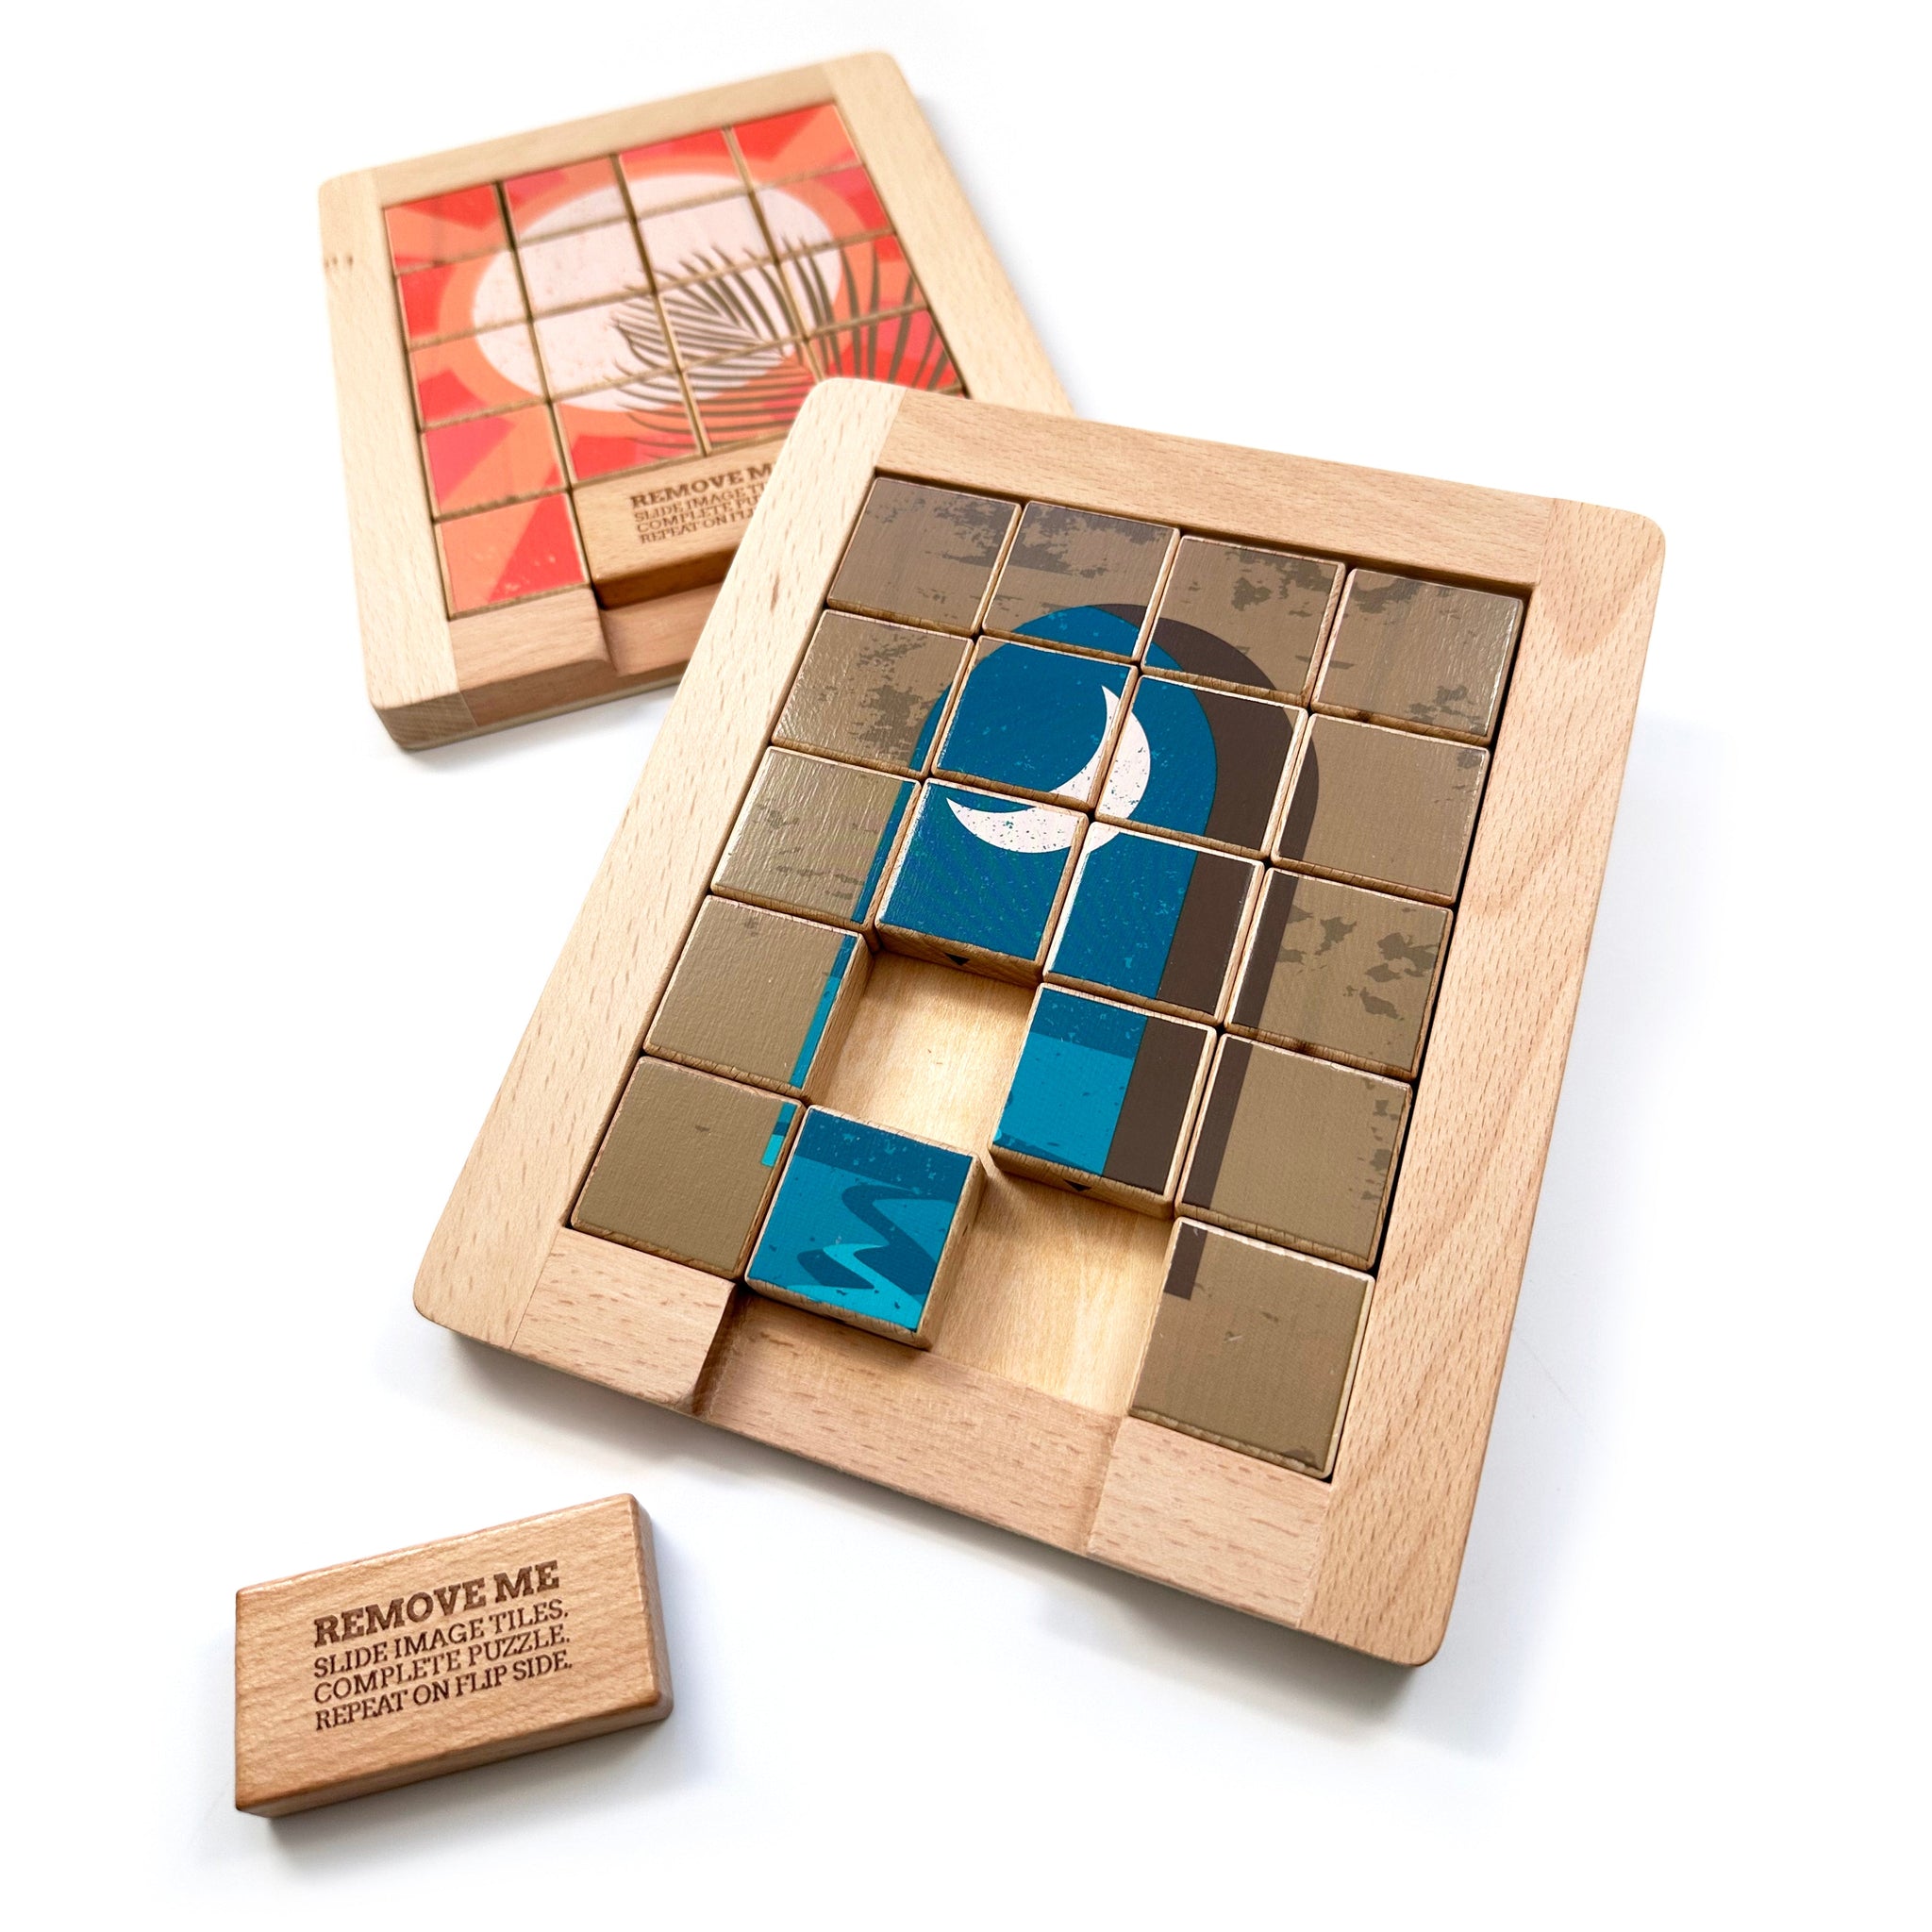 Dualities Wooden Sliding Puzzle: Day v. night 2 sided puzzle